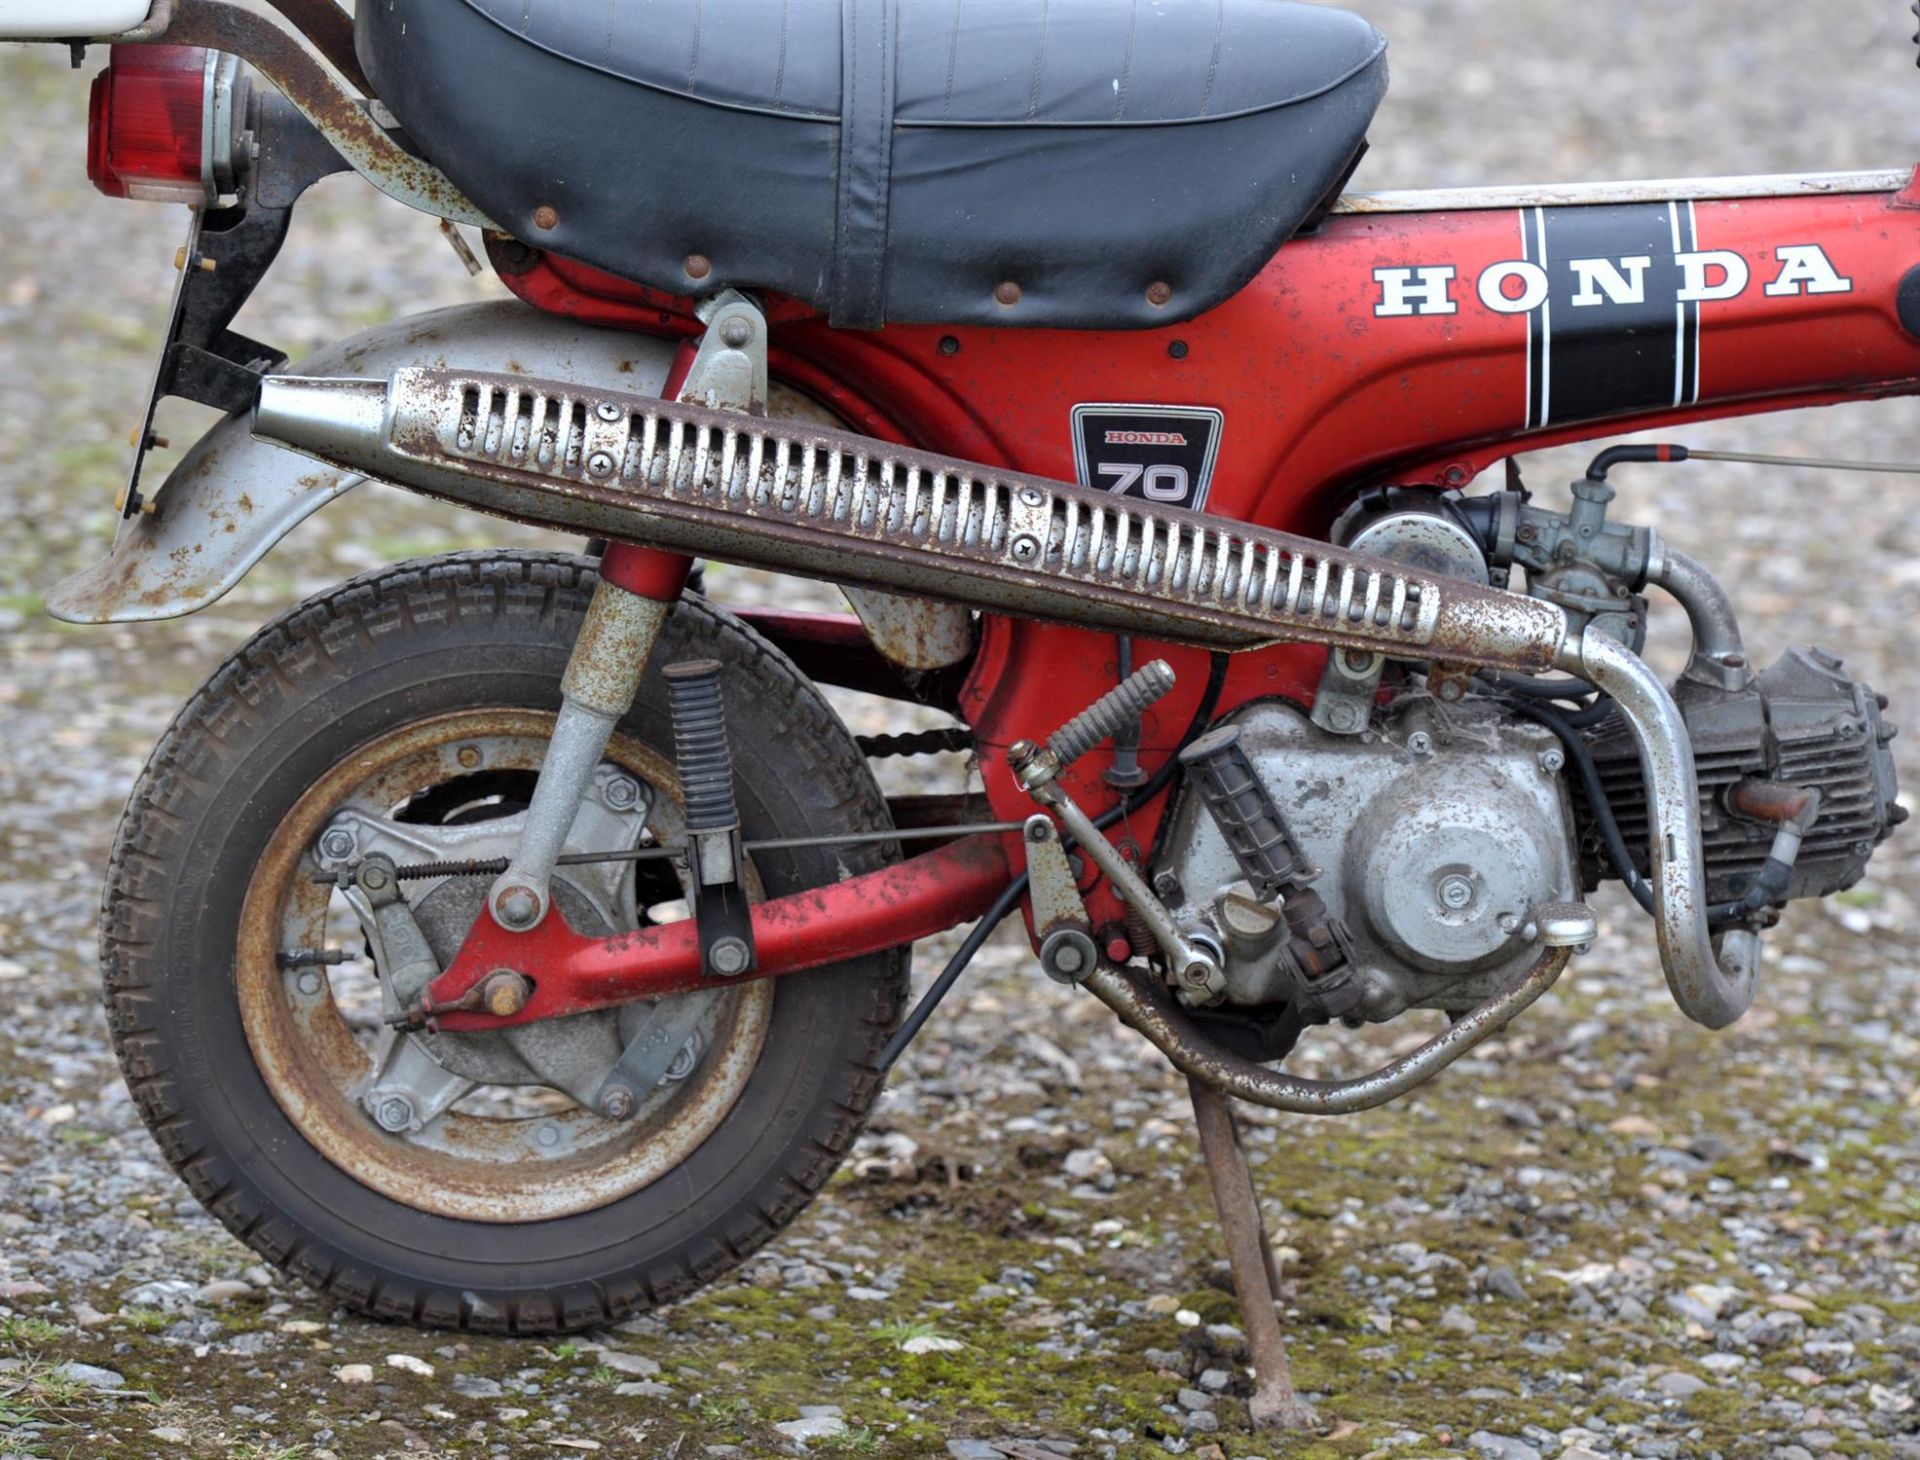 Motor Bike, Honda 70, Monkey Bike, red chassis. Registration number PPC 723L, comes with Original - Image 6 of 13